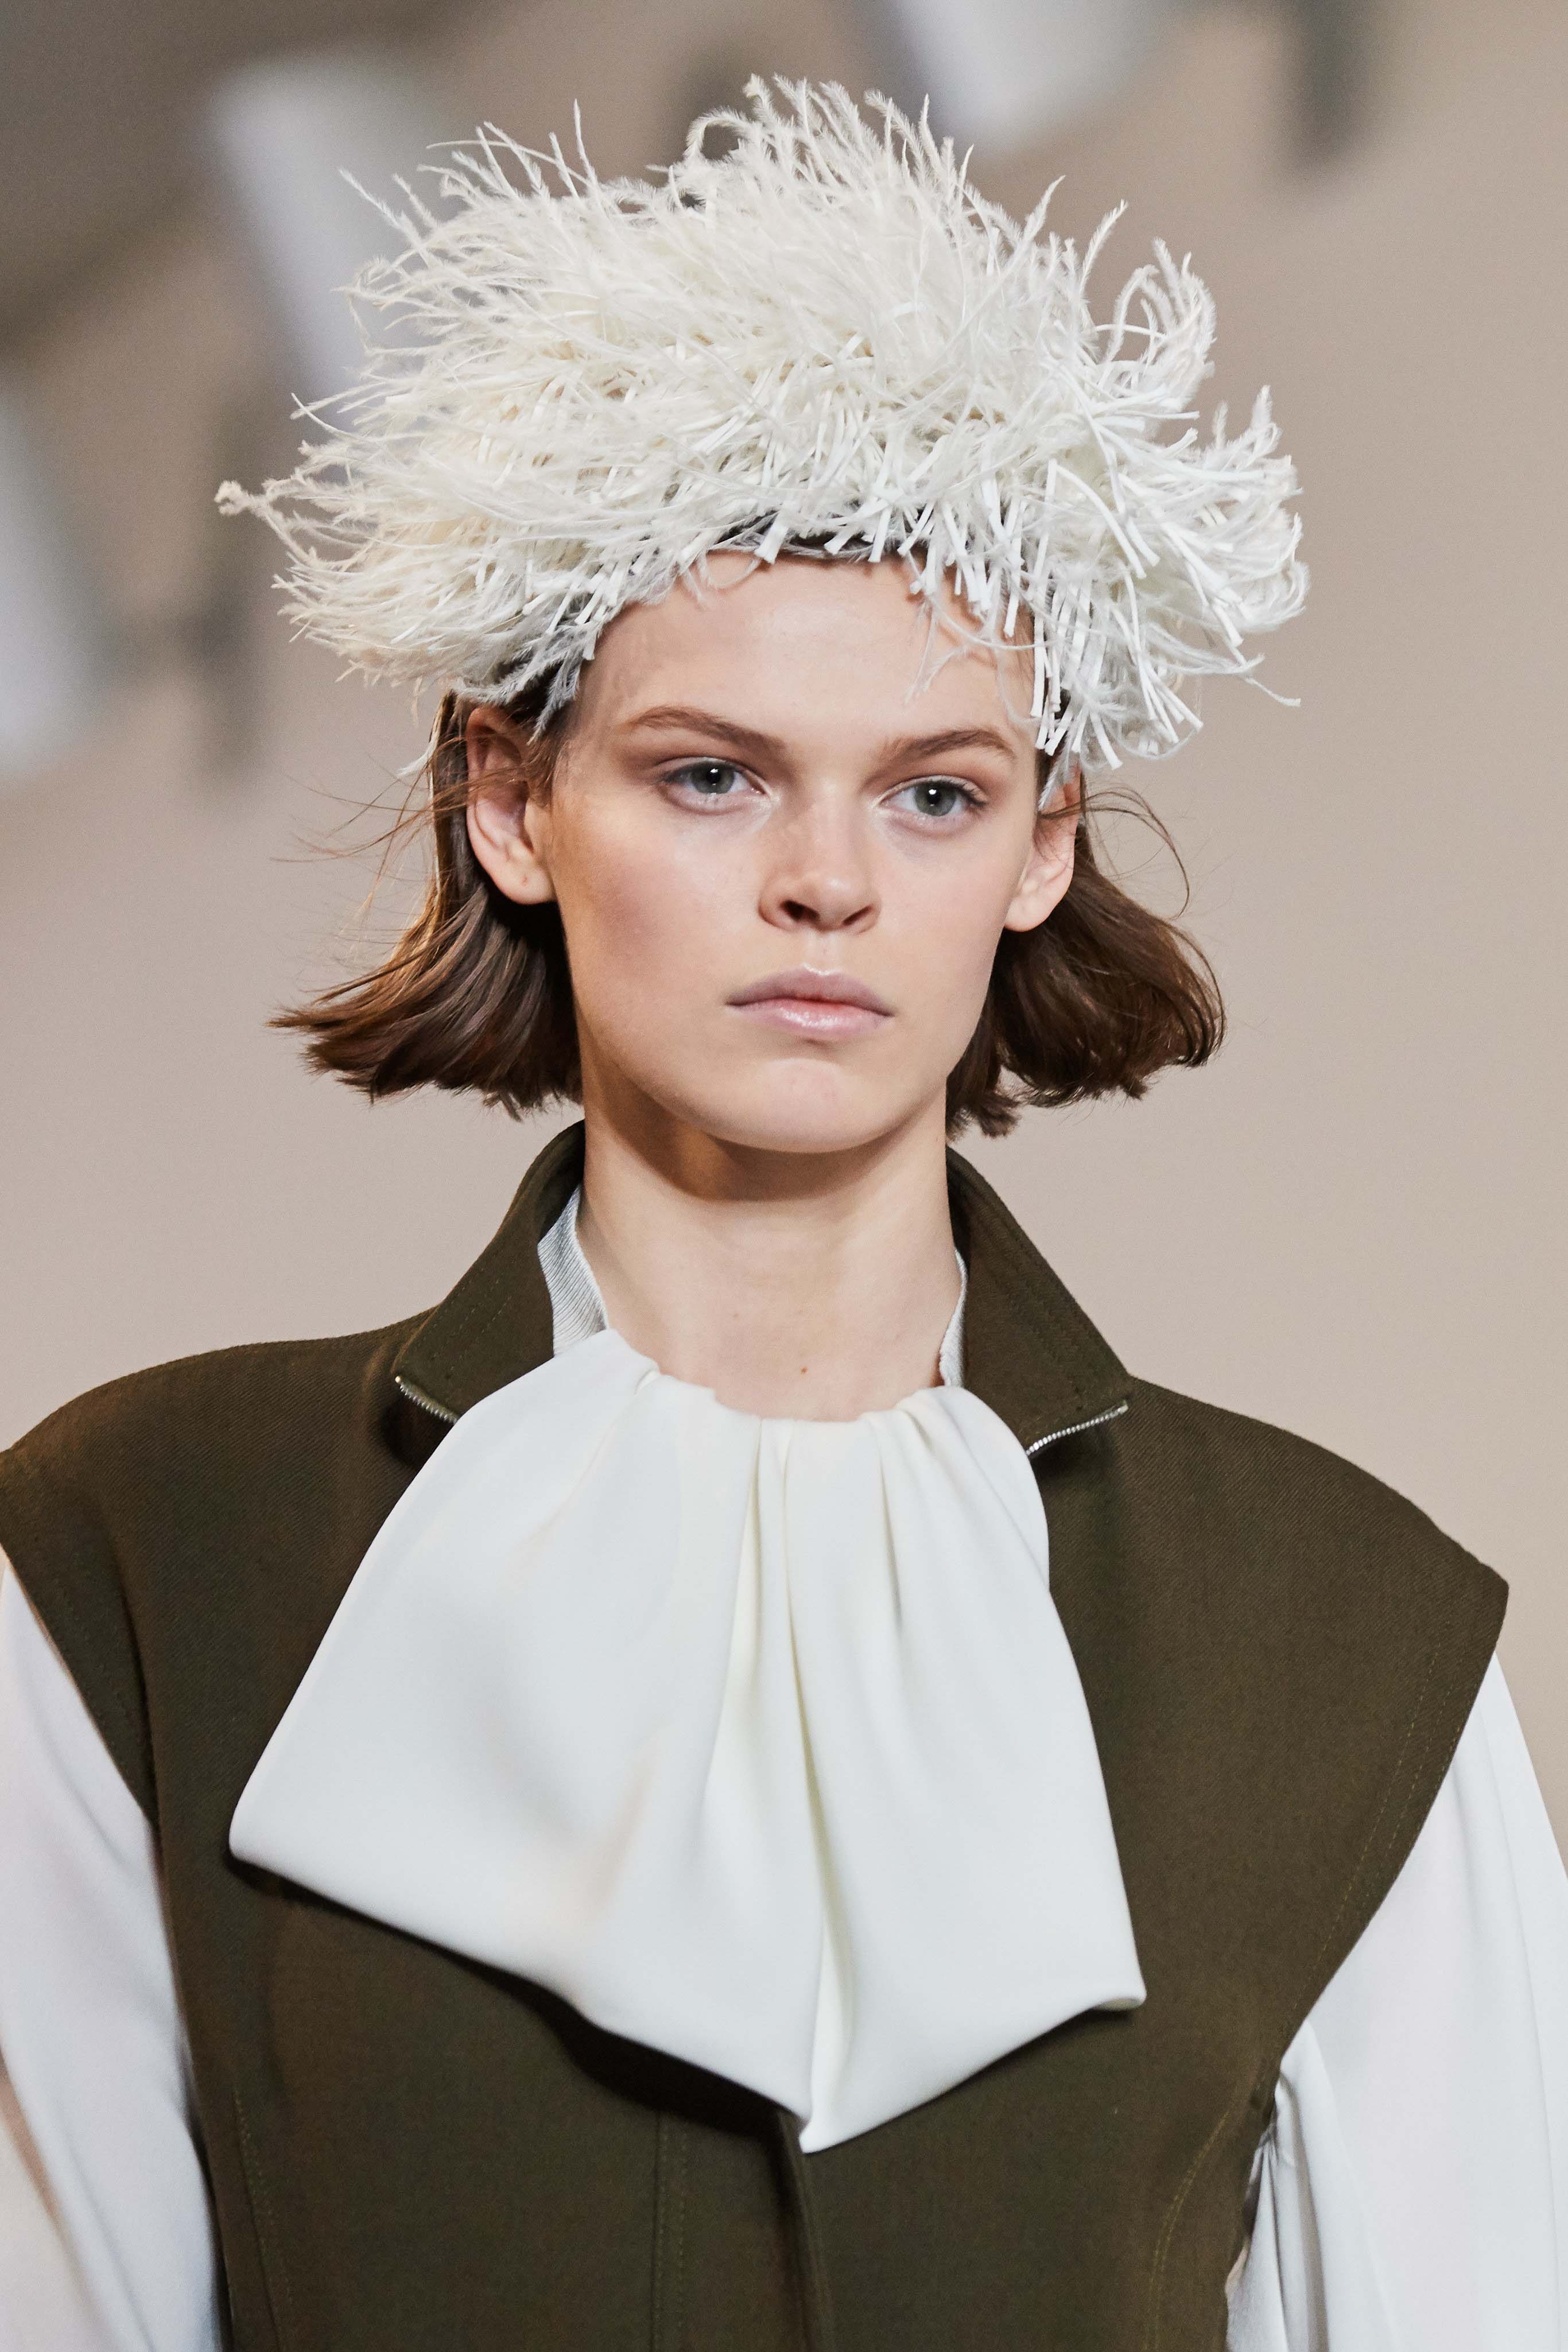 Fall Winter 2019 2020 Trends - Fashion Week Coverage